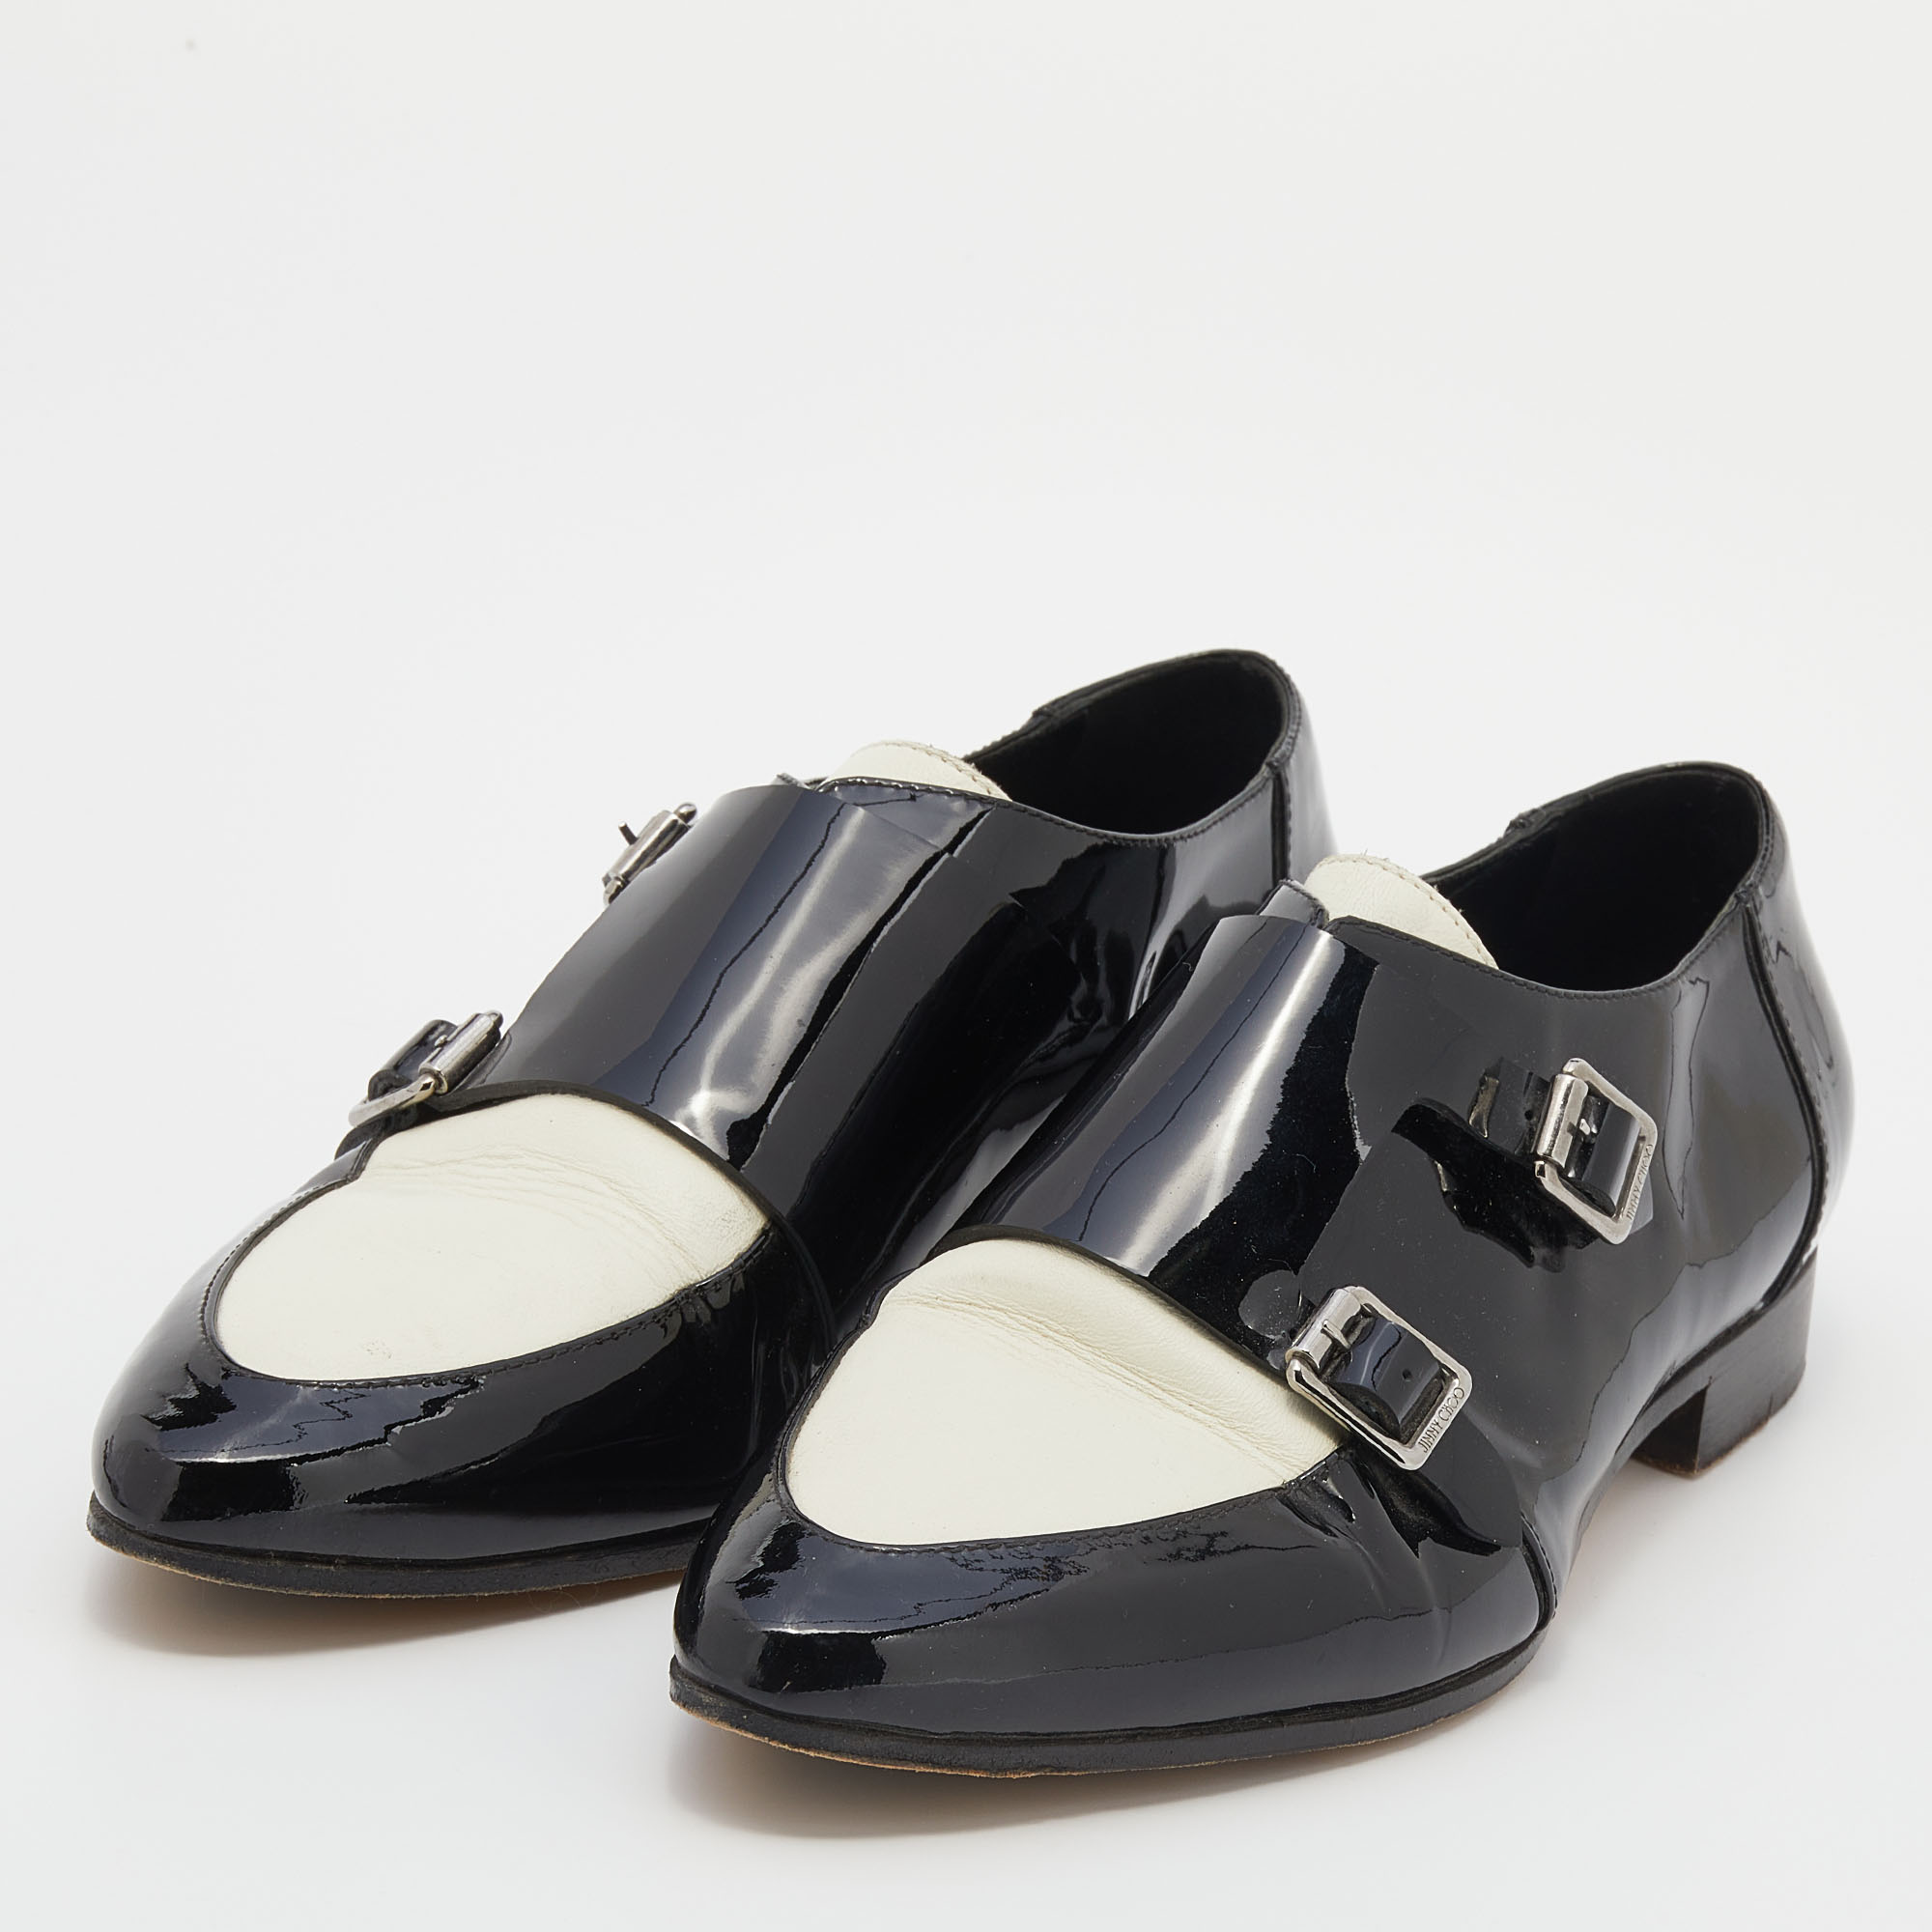 

Jimmy Choo Black/White Patent Leather And Leather Mardi Monk Strap Flats Size